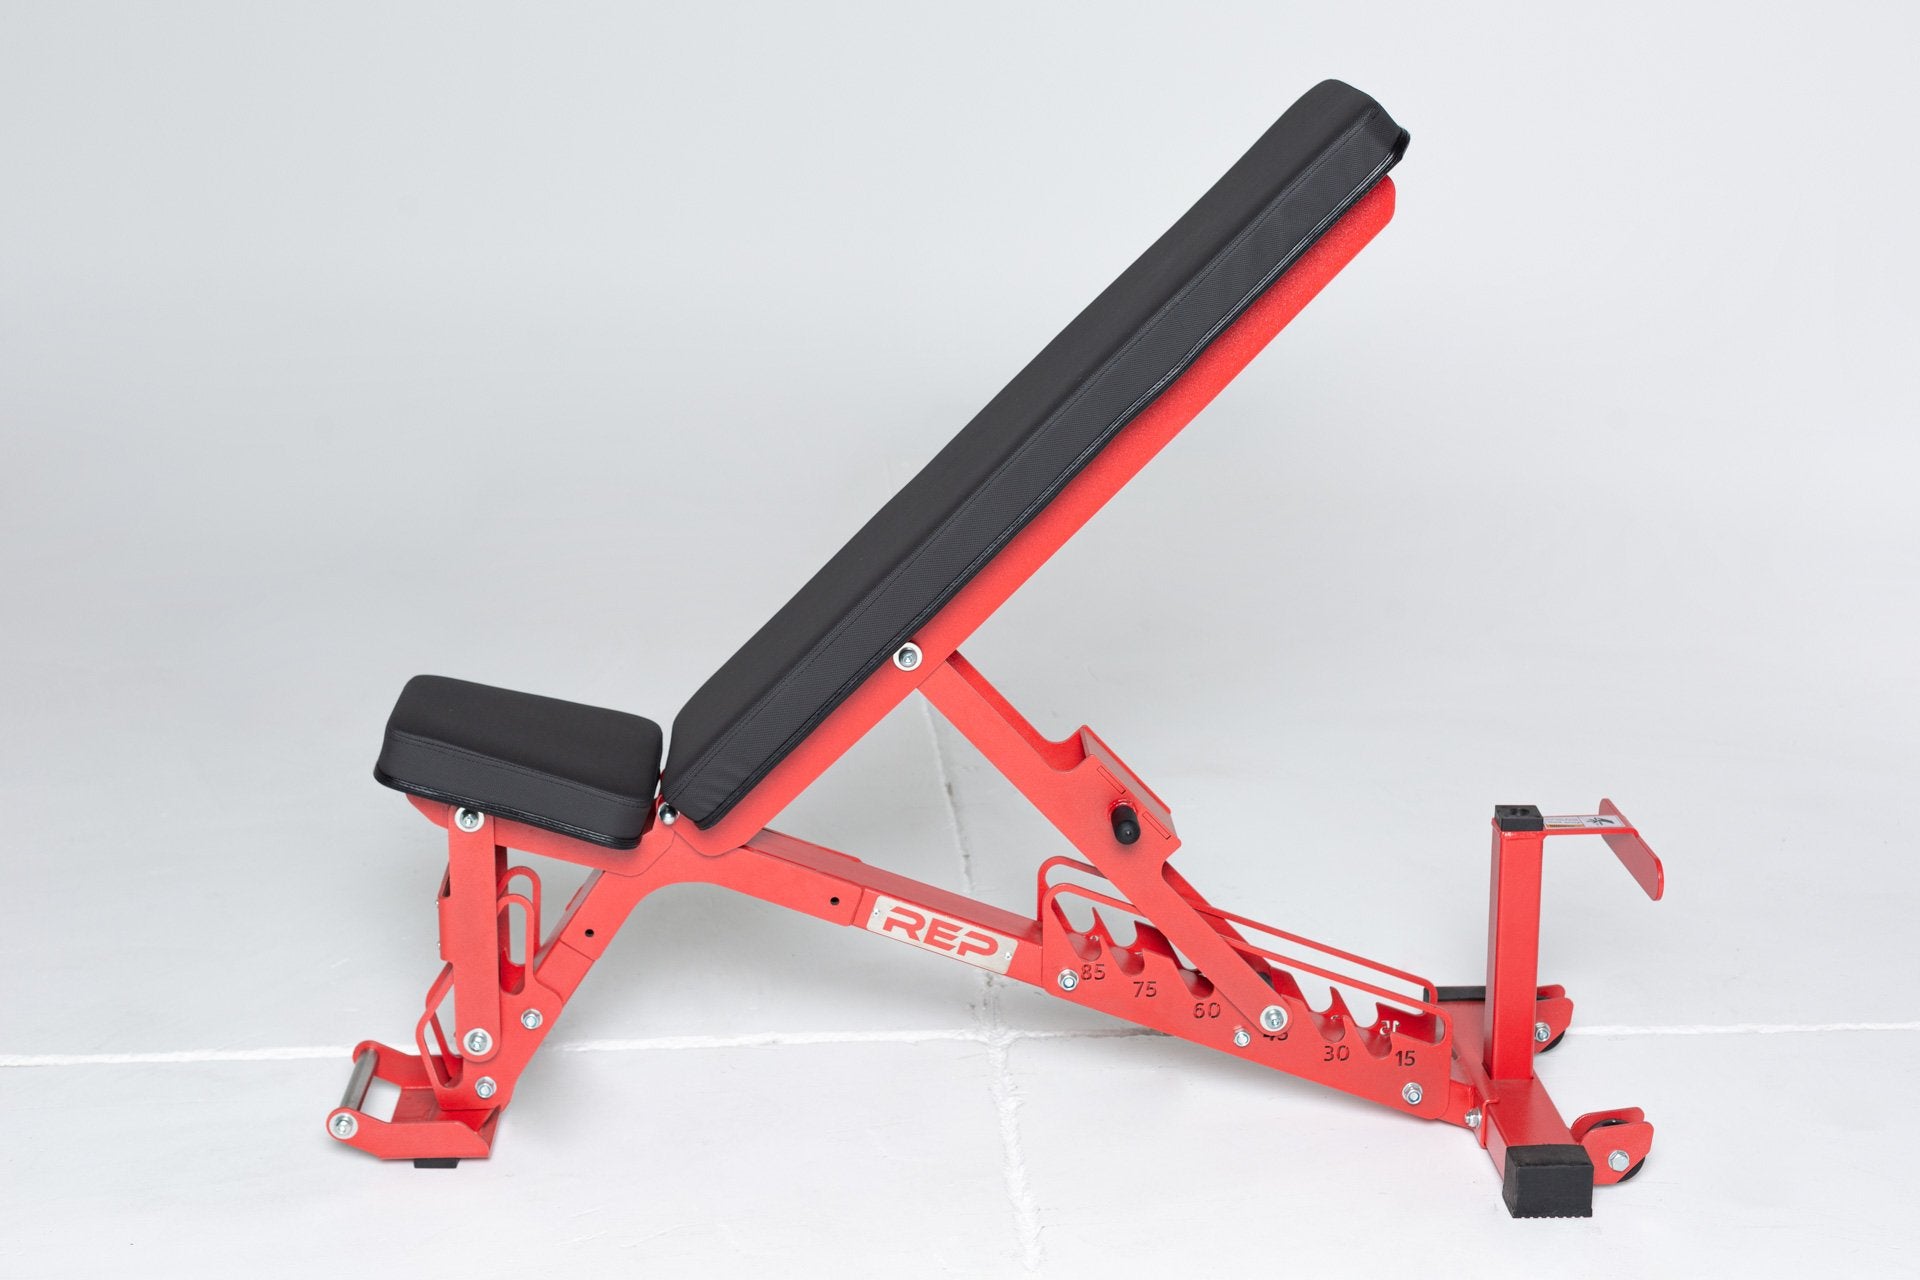 AB-5200 Adjustable Weight Bench